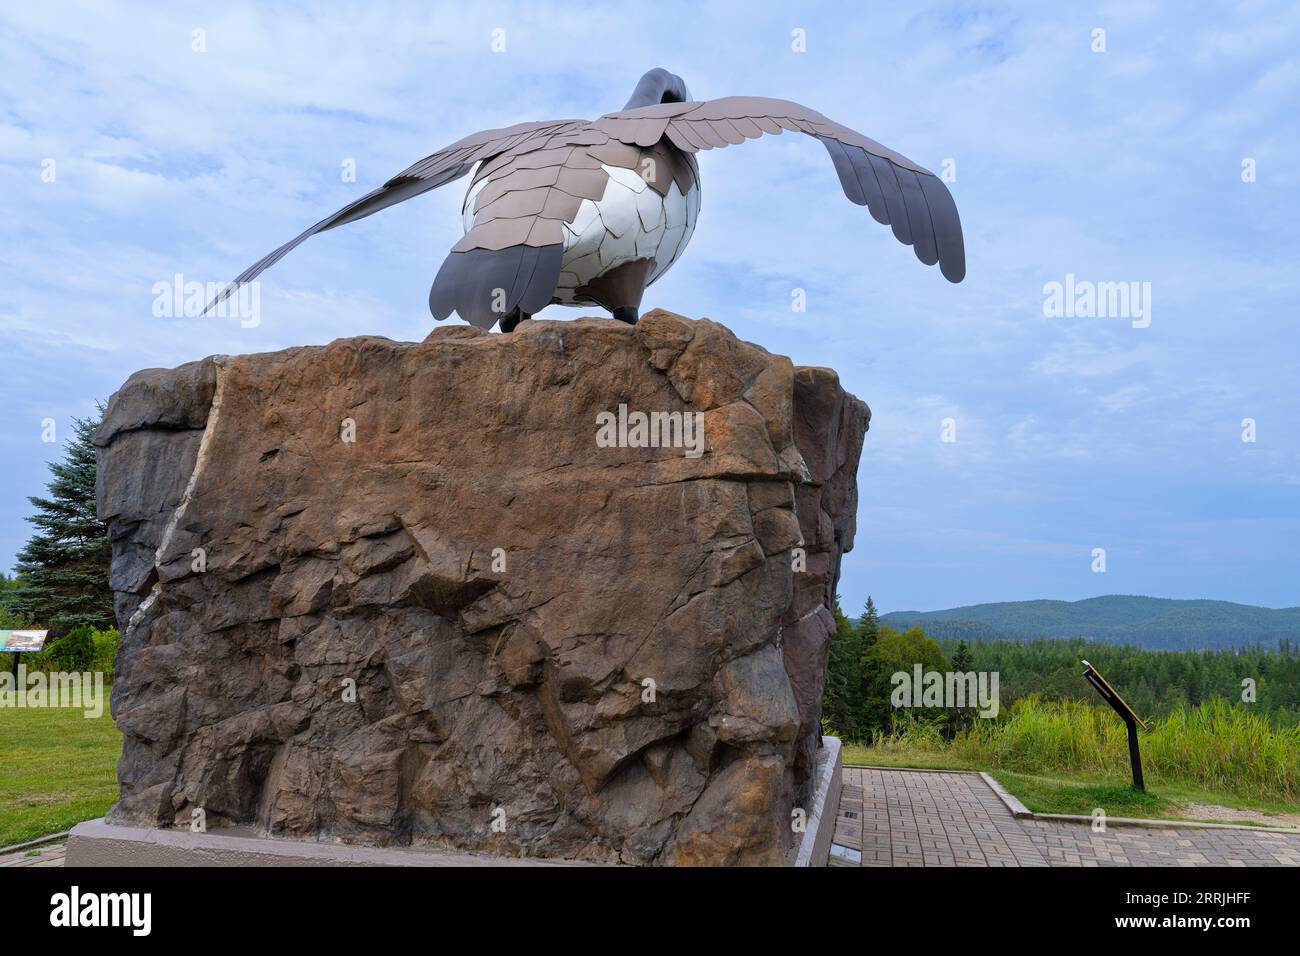 The Wawa Goose at the visitor information center in Wawa, Ontario in August 2023 Stock Photo